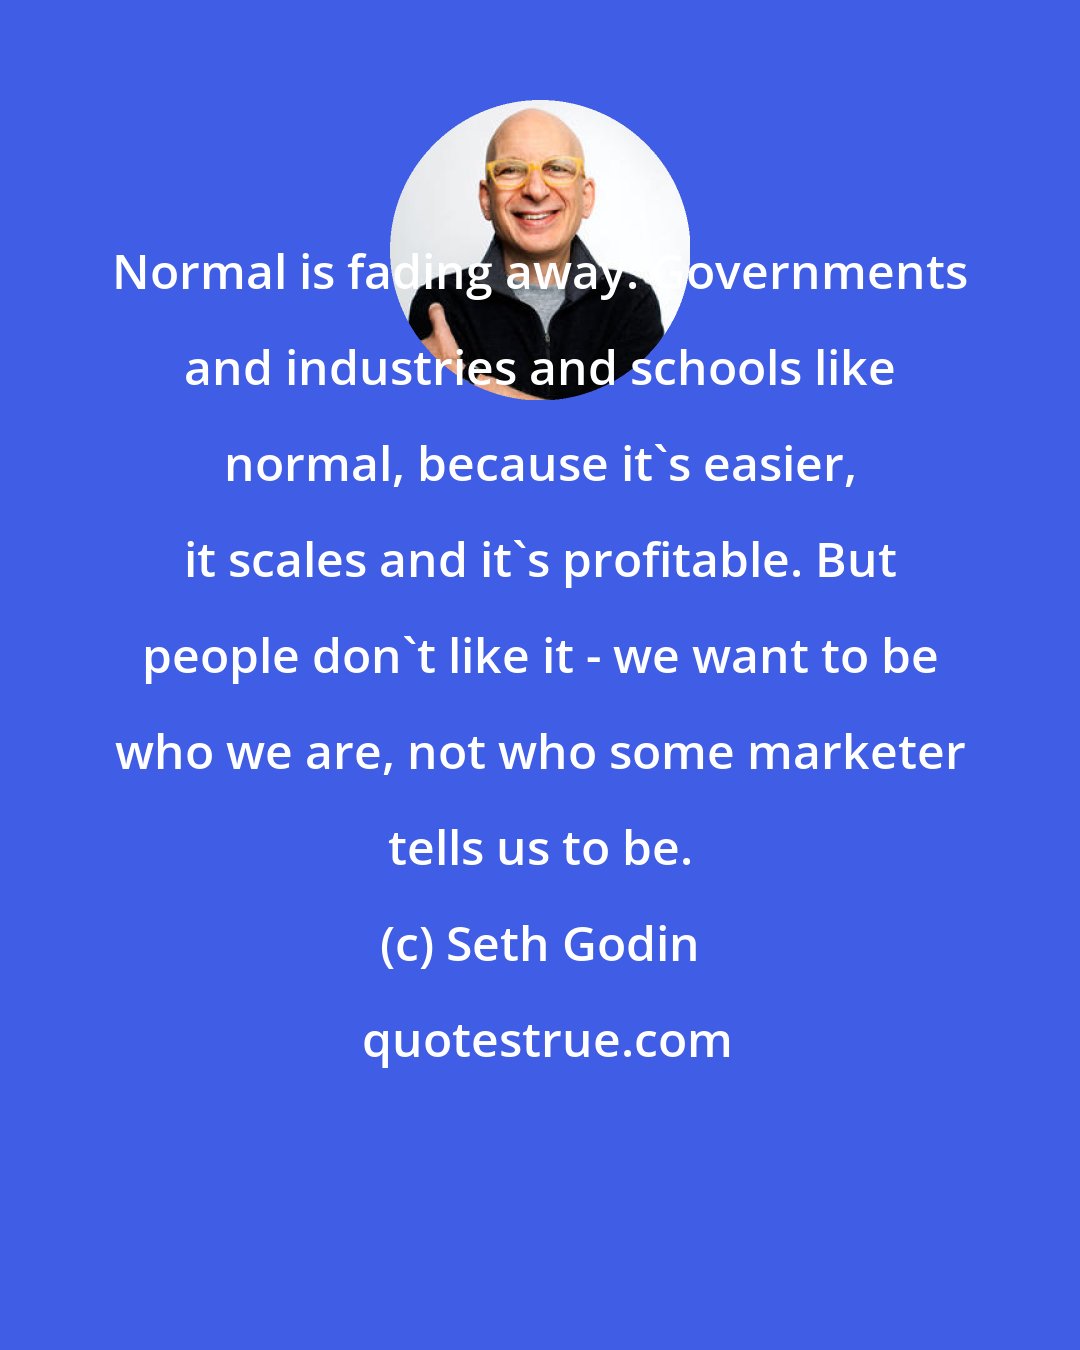 Seth Godin: Normal is fading away. Governments and industries and schools like normal, because it's easier, it scales and it's profitable. But people don't like it - we want to be who we are, not who some marketer tells us to be.